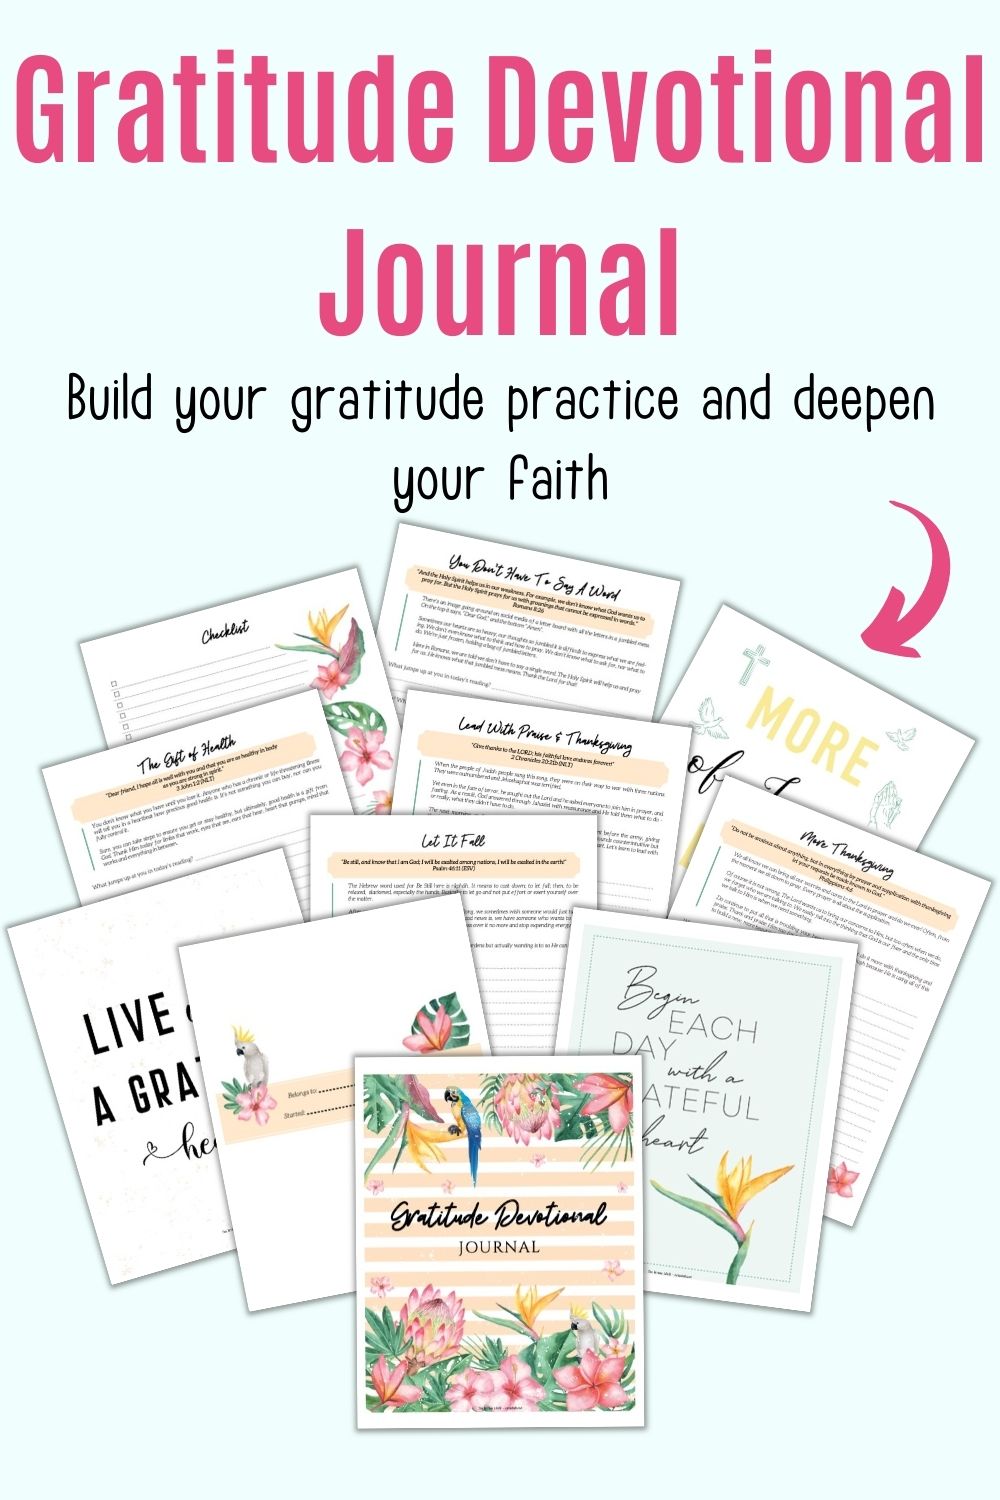 Text "Gratitude Devotional Journal - build your gratitude practice and deepen your faith" above a preview of 11 pages form a tropical themed devotional gratitude journal